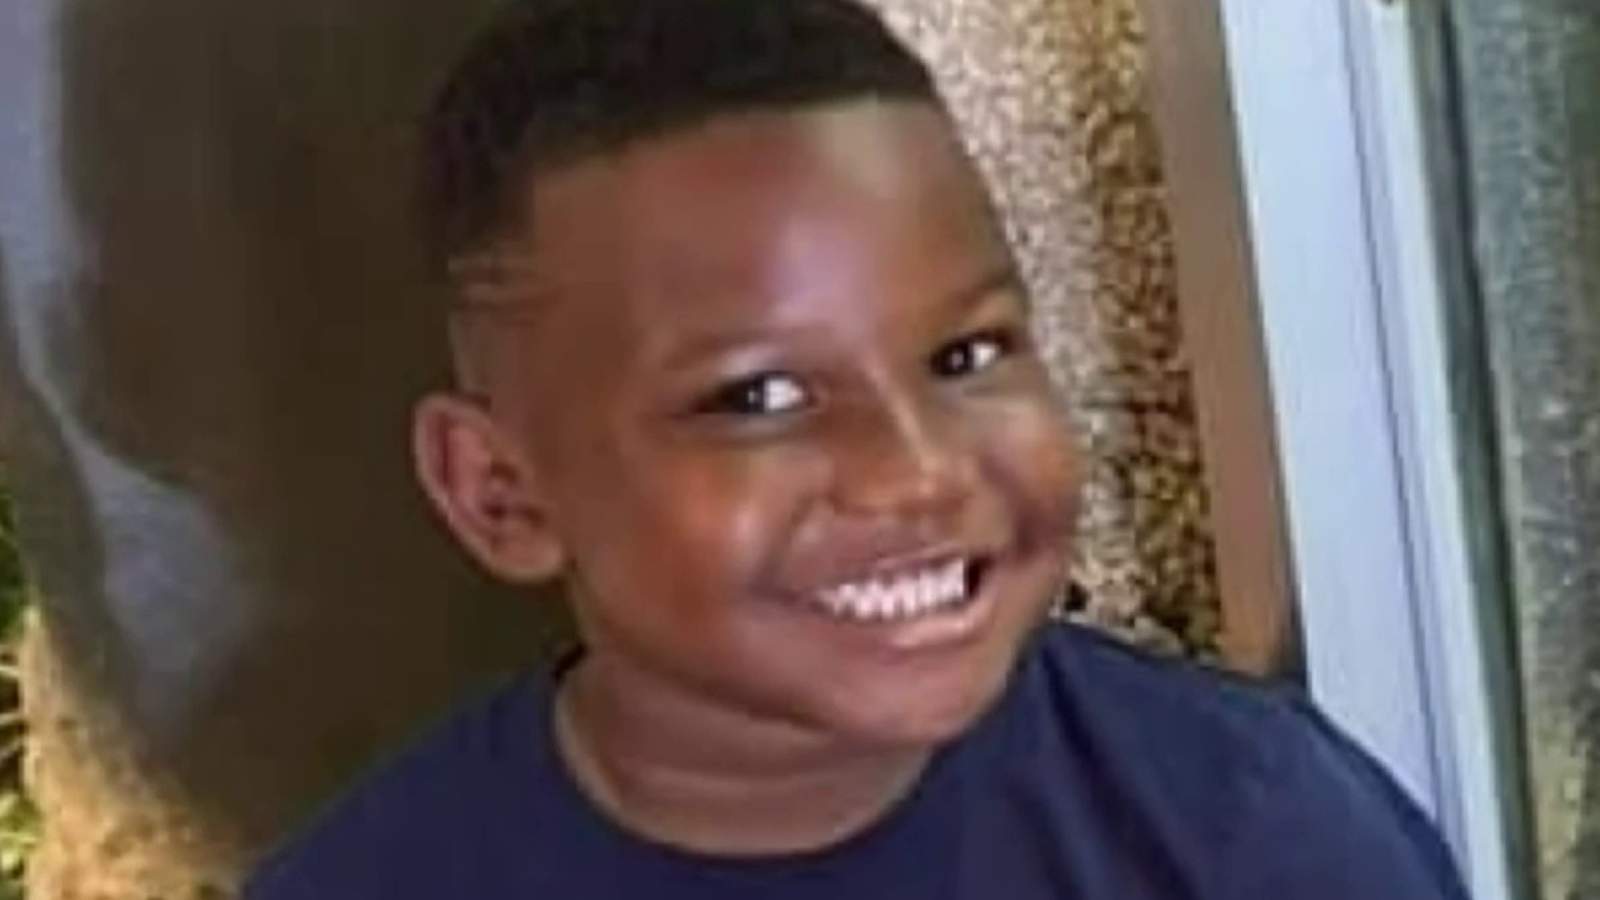 Warren and Detroit police team up with FBI to investigate murder involving 6-year-old boy